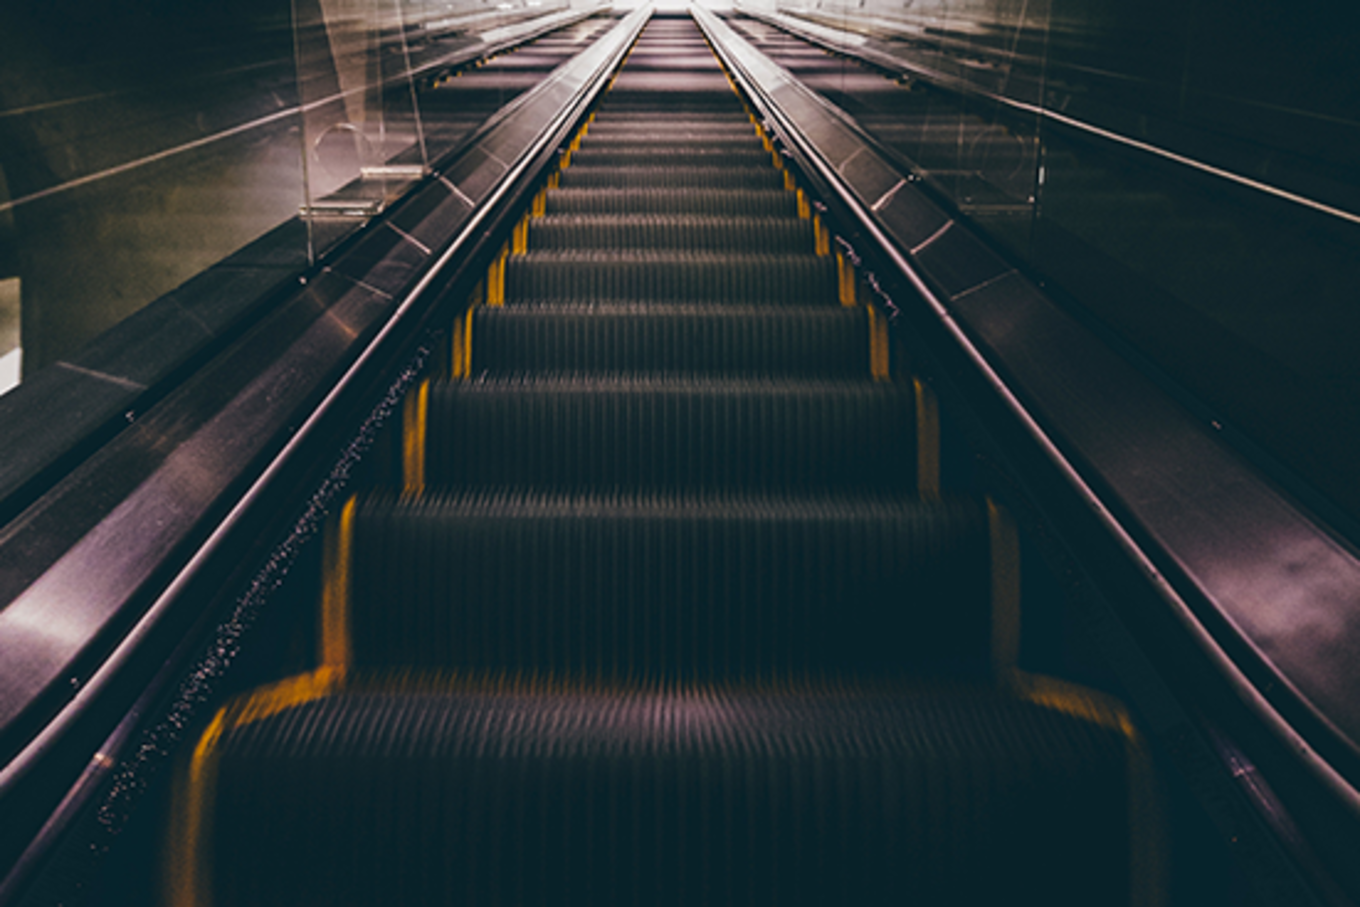 Image of an escalator looking down.